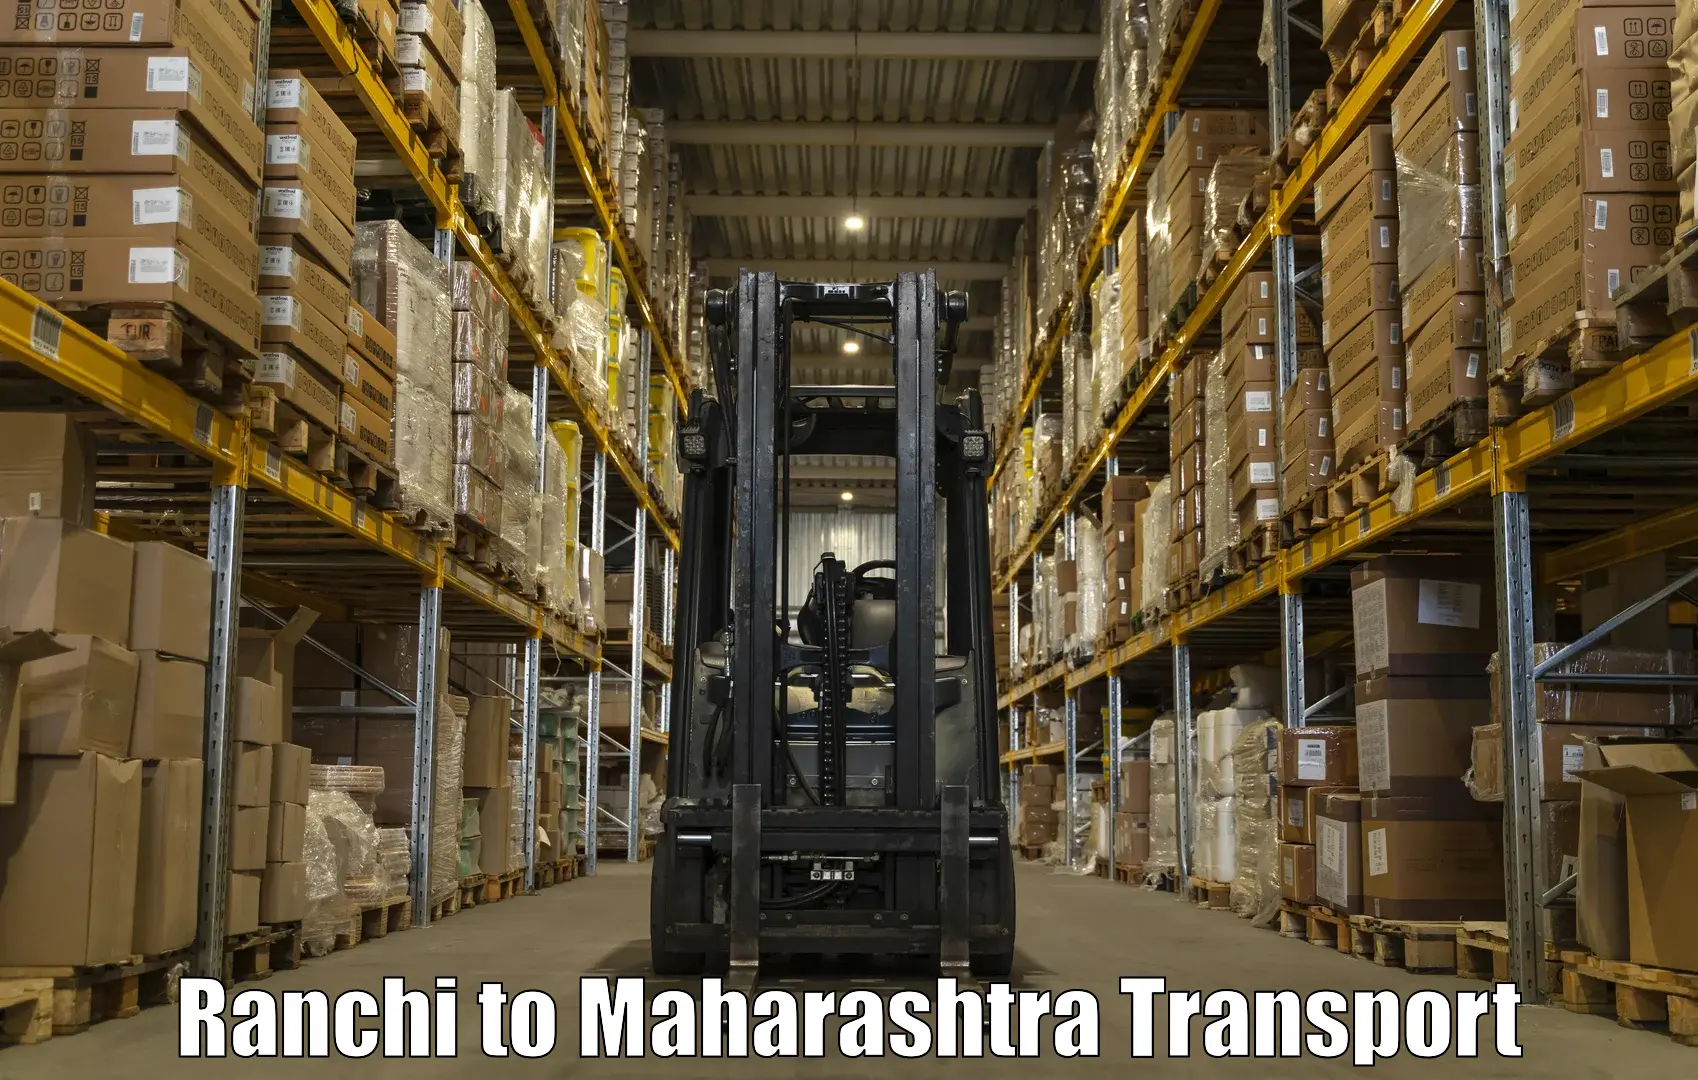 Truck transport companies in India Ranchi to Kandhar